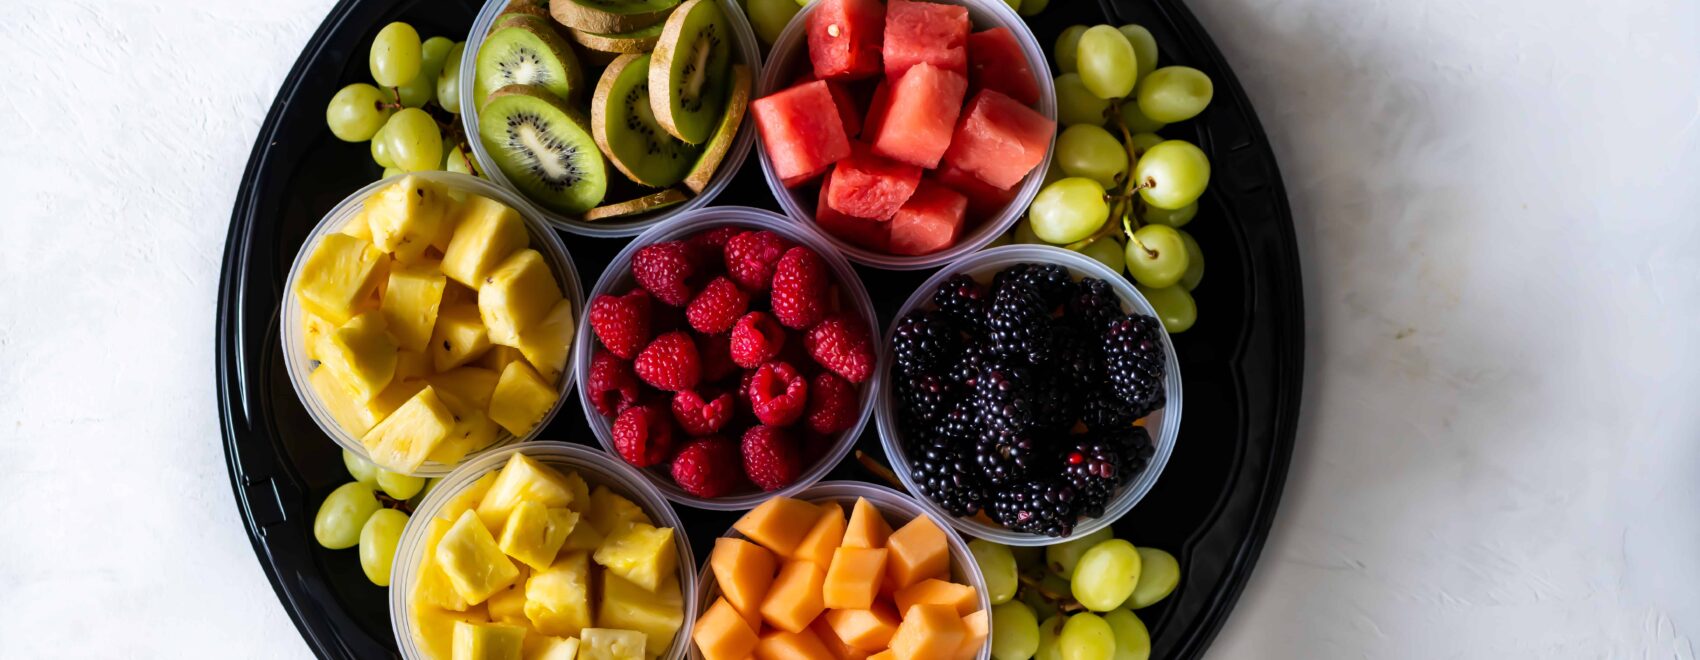 Fruit tray filled with berries, watermelon, grapes, kiwi, melon and pineapple